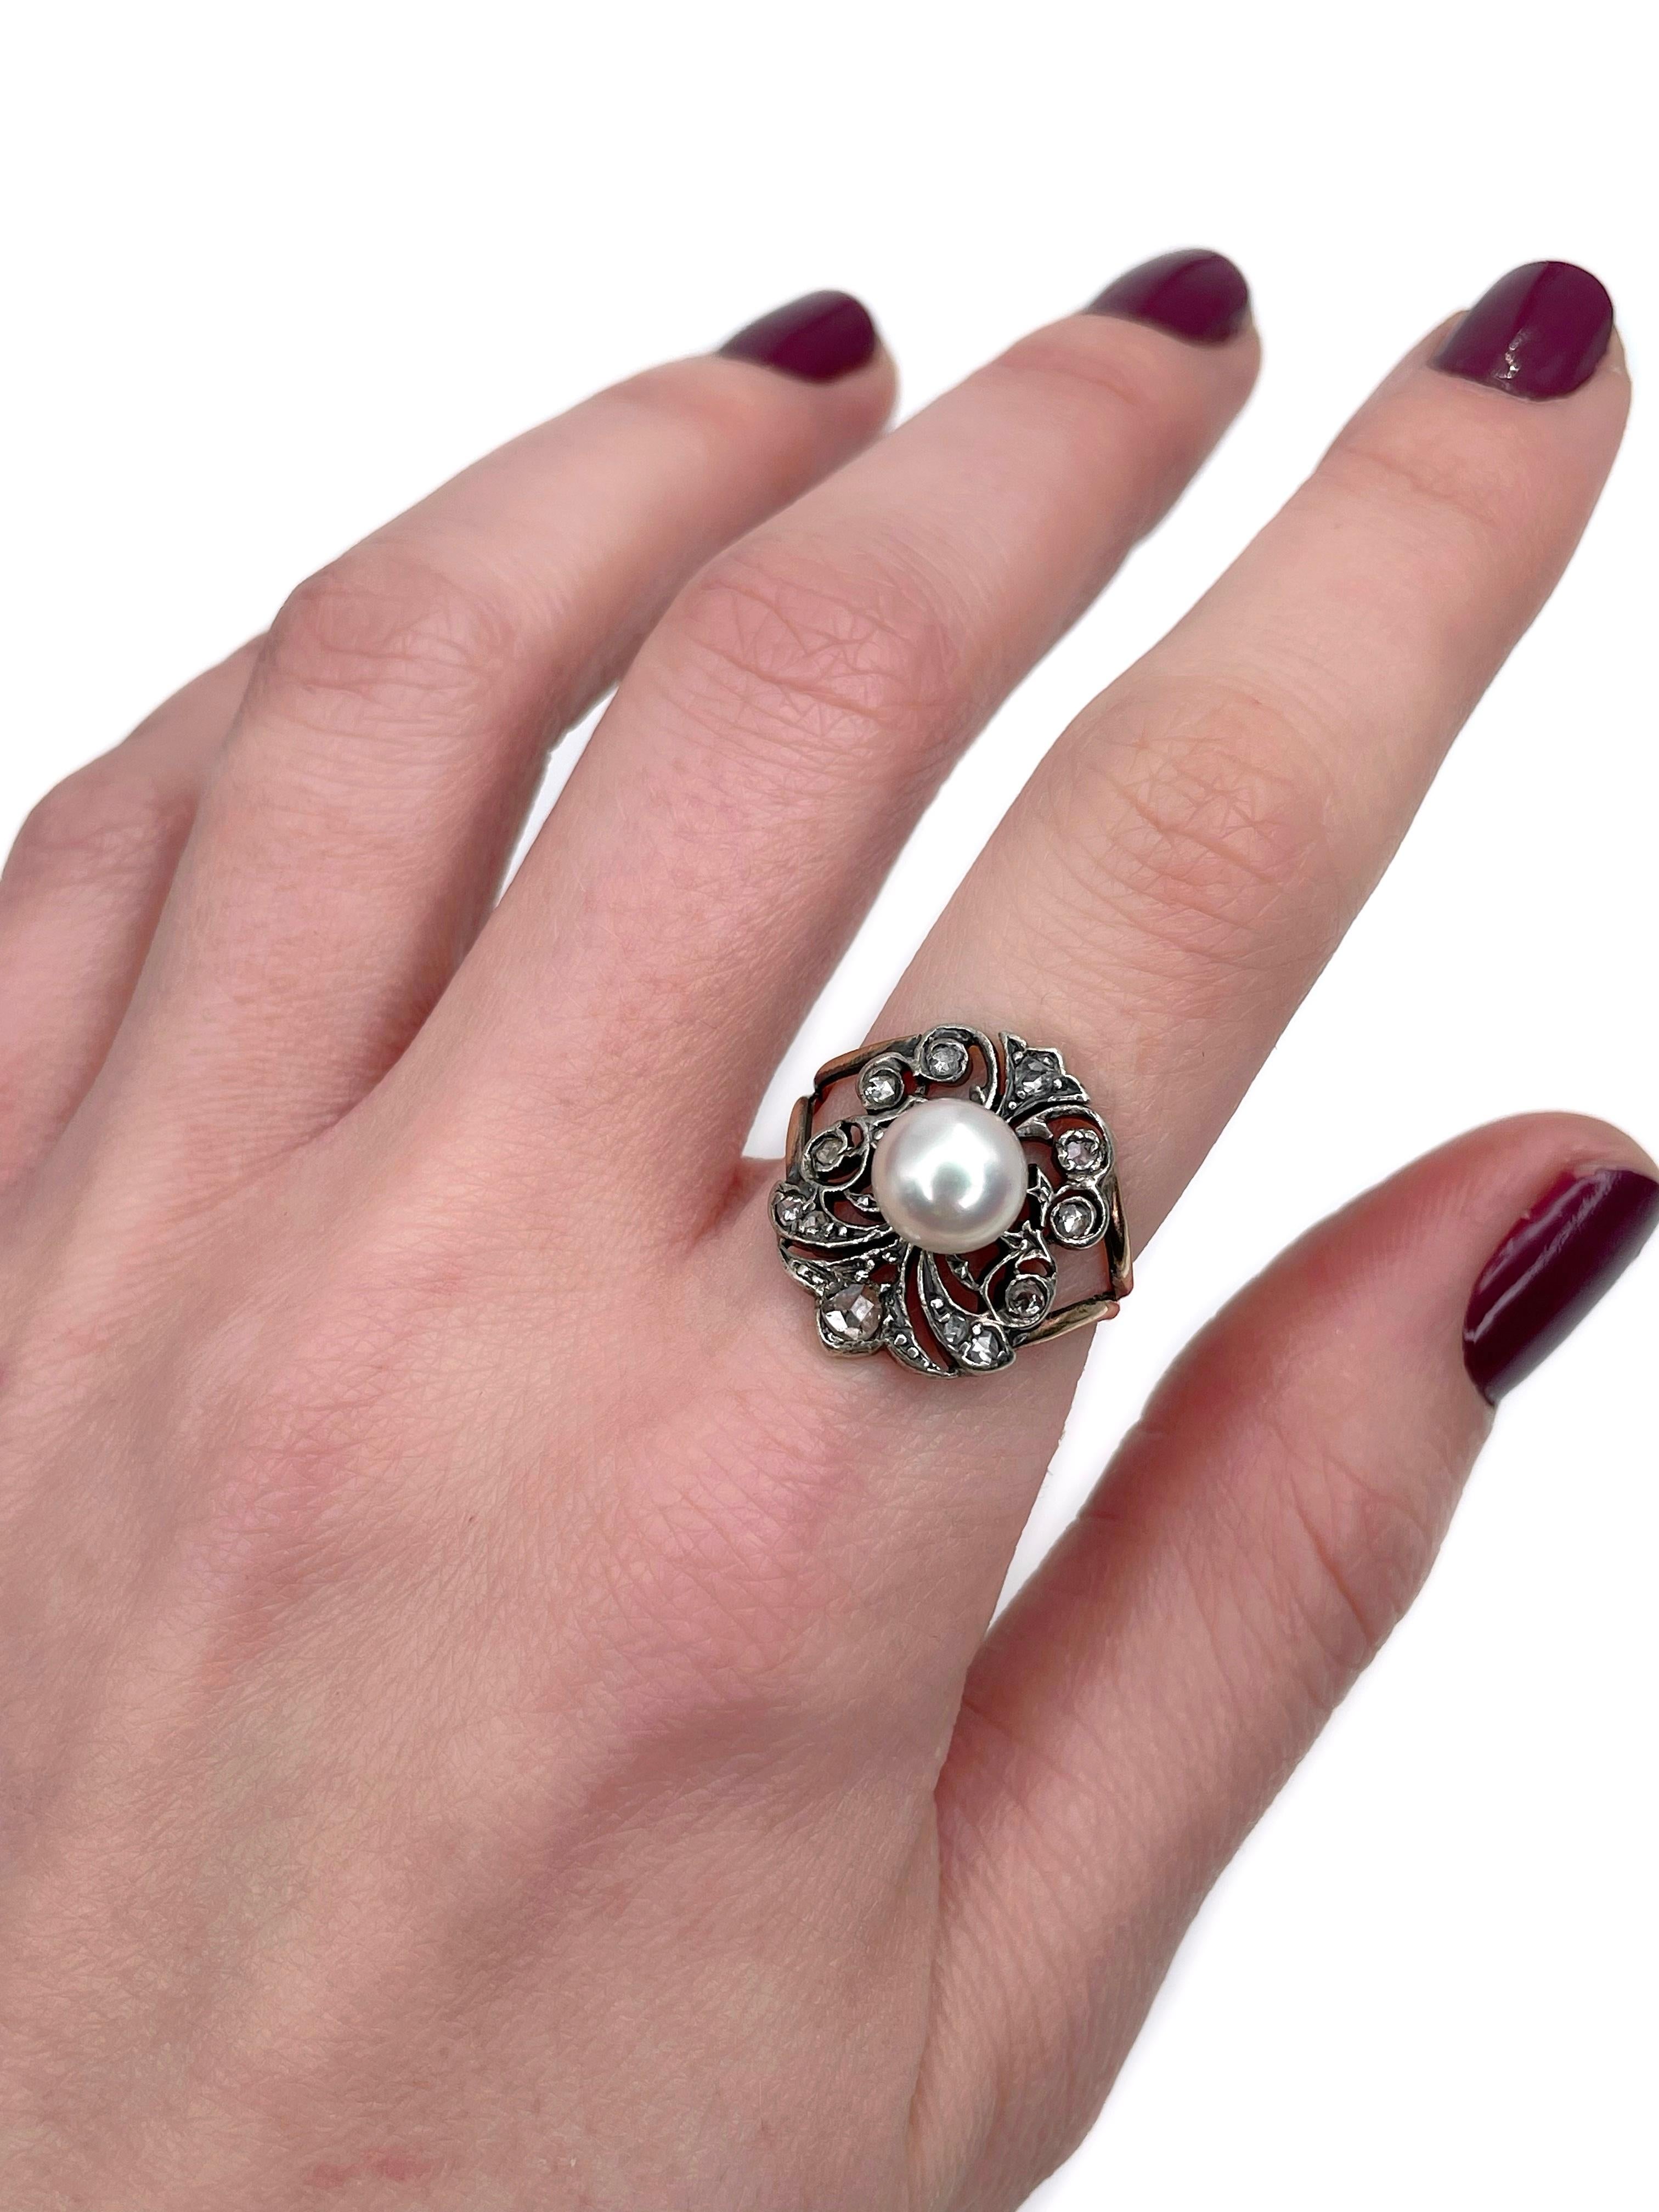 This is an Edwardian openwork cocktail ring crafted in 14K gold. Circa 1910. 

It features 1 cultured pearl and 12 rose cut diamonds (TW 0.10ct, W-STW, SI-P2).

Weight: 4.24g 
Size: 17 (US 6.75)

IMPORTANT: please ask about the possibility to resize